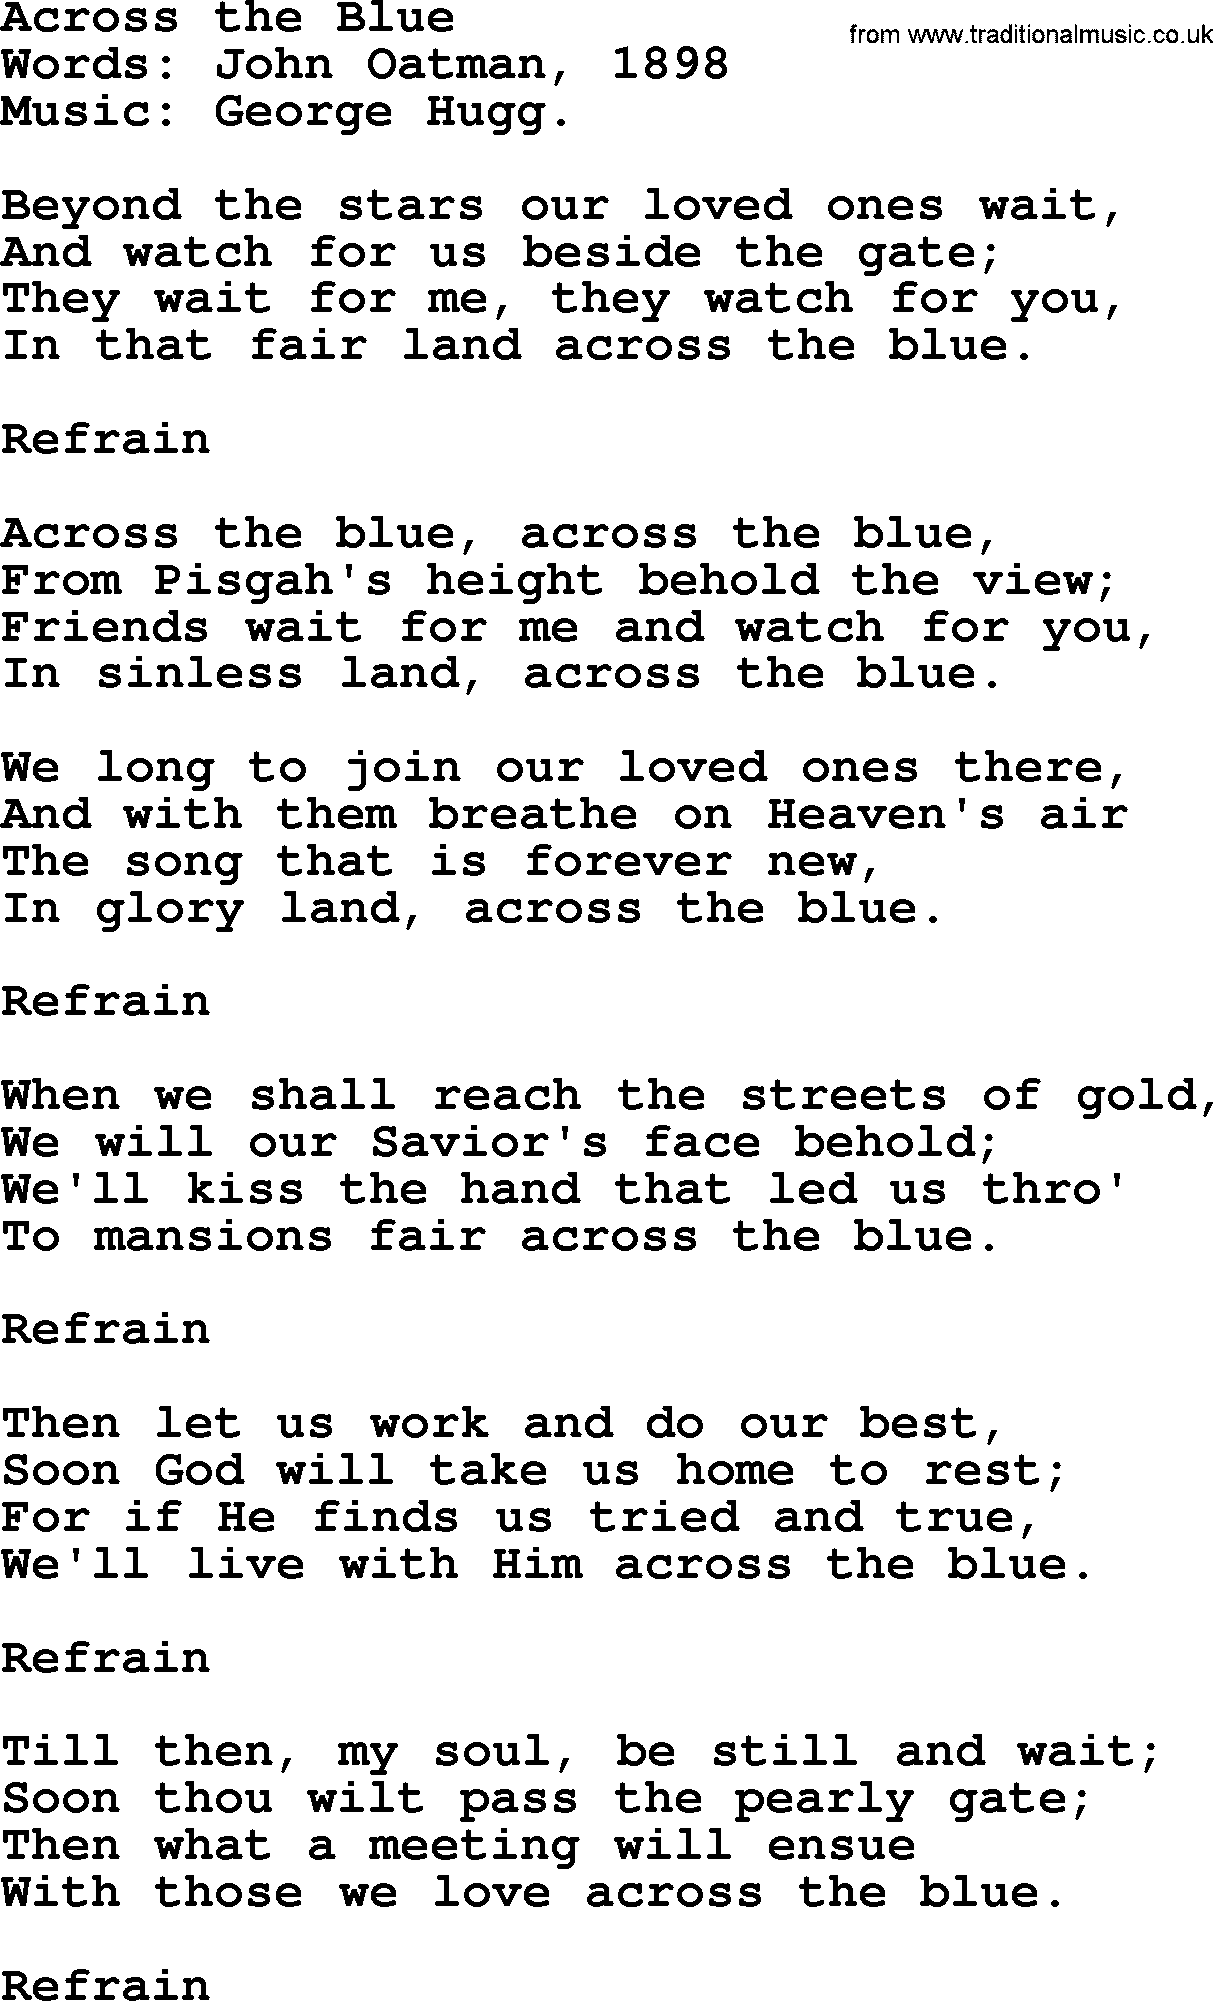 Songs and Hymns about Heaven: Across The Blue lyrics with PDF